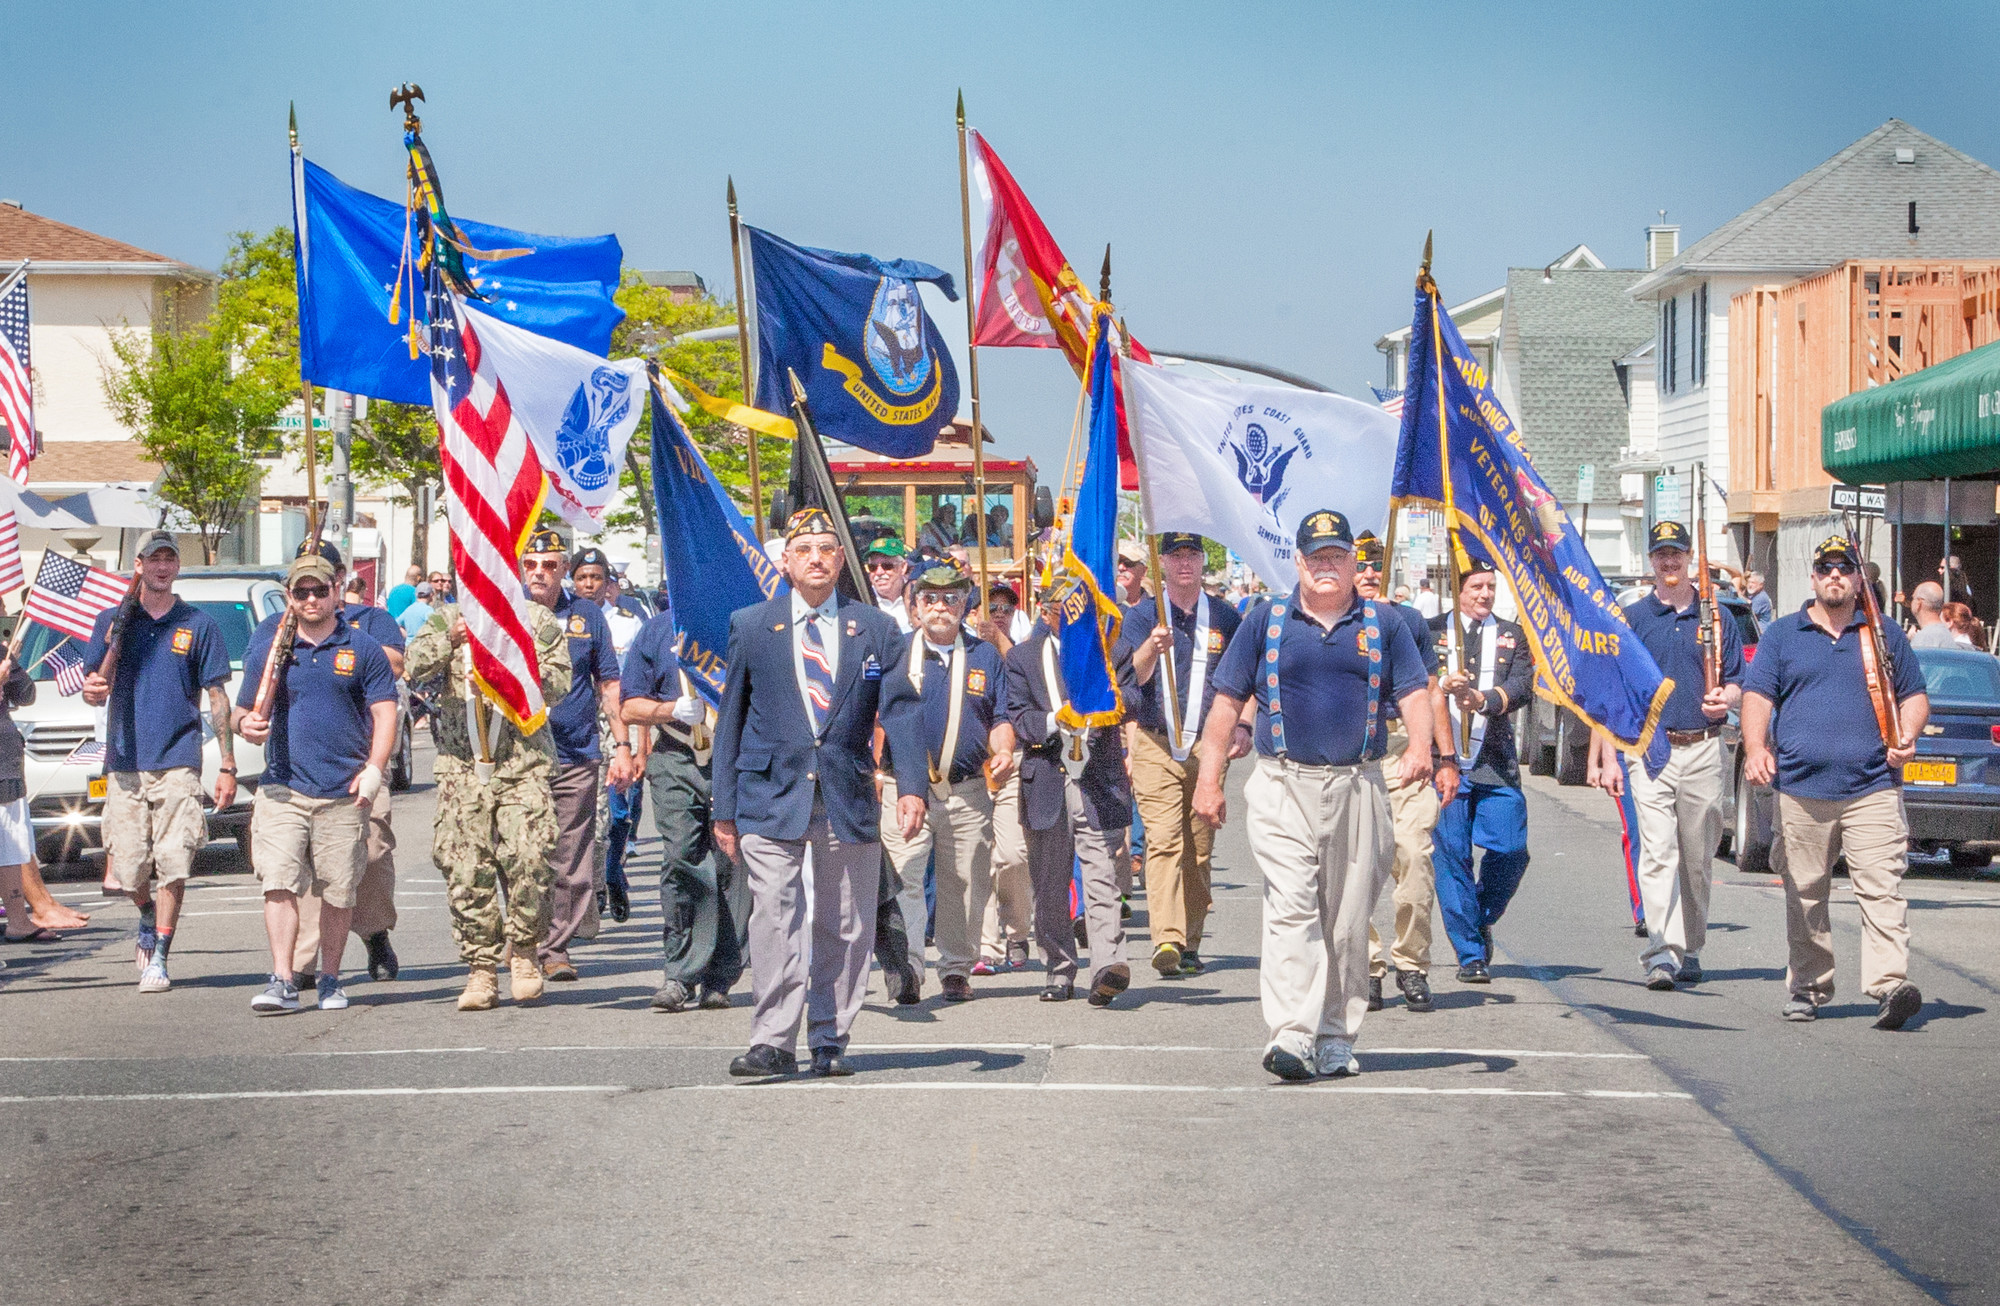 Commander Dan McPhee, right, led members of the VFW Post 1384 during the Memorial Day Parade on May 25, where officials and residents paid tribute to the sacrifices made by the men and women of the U.S. armed forces.